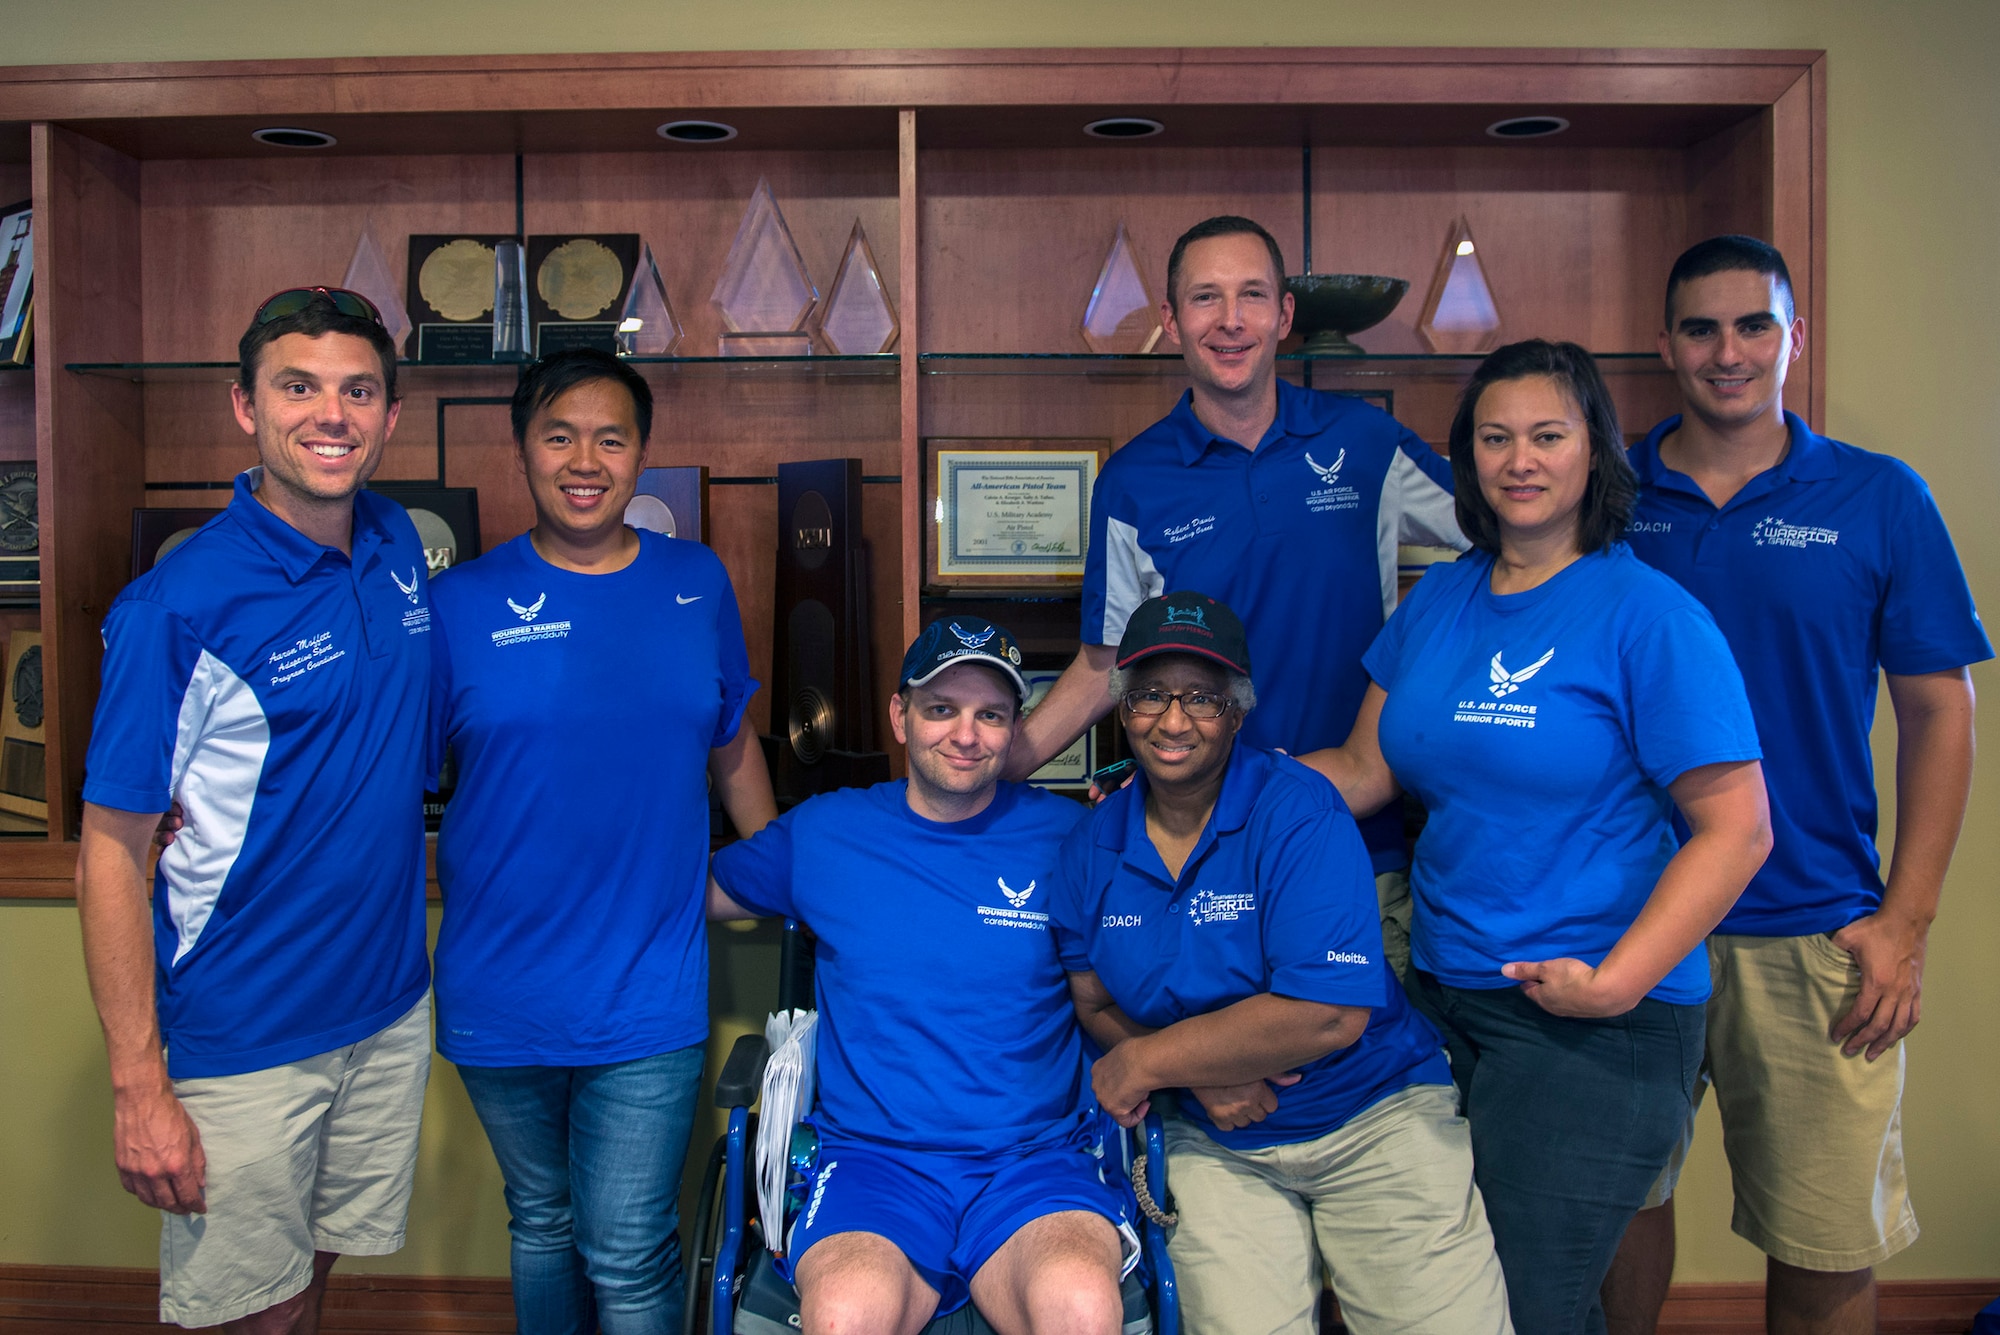 Team Air Force’s shooting team’s coaching staff and athletes pose for a photo during the 2016 Department of Defense Warrior Games shooting competition, June 19, 2016, at the United States Military Academy in West Point, N.Y. During the event, the team won the overall team shooting competition and six athletes were awarded medals, setting an Air Force record. (U.S. Air Force photo by Airman 1st Class Greg Nash/Released)